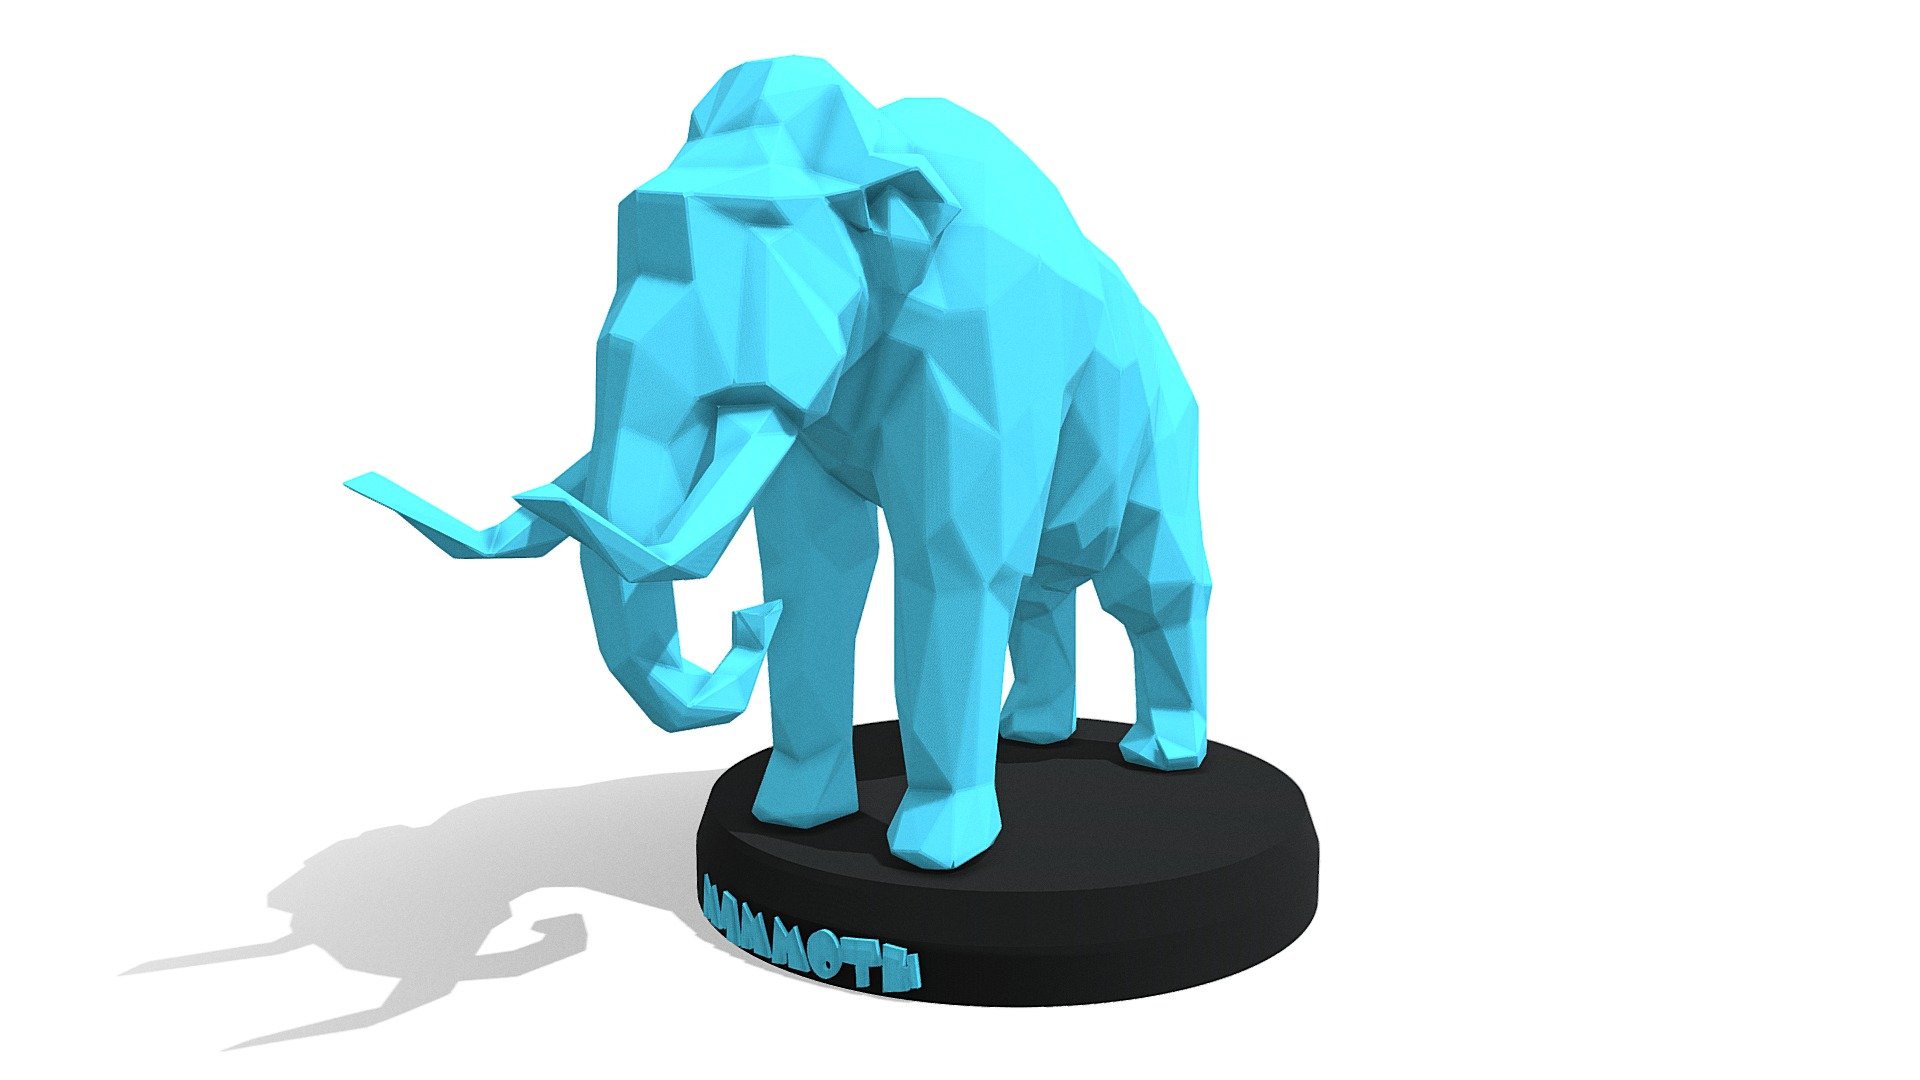 Polygonal 3D Model with Parametric modeling with gold material, make it recommend for :




Basic modeling 

Rigging 

sculpting 

Become Statue

Decorate

3D Print File

Toy

Have fun  :) - Poly Mammoth - Buy Royalty Free 3D model by Puppy3D 3d model